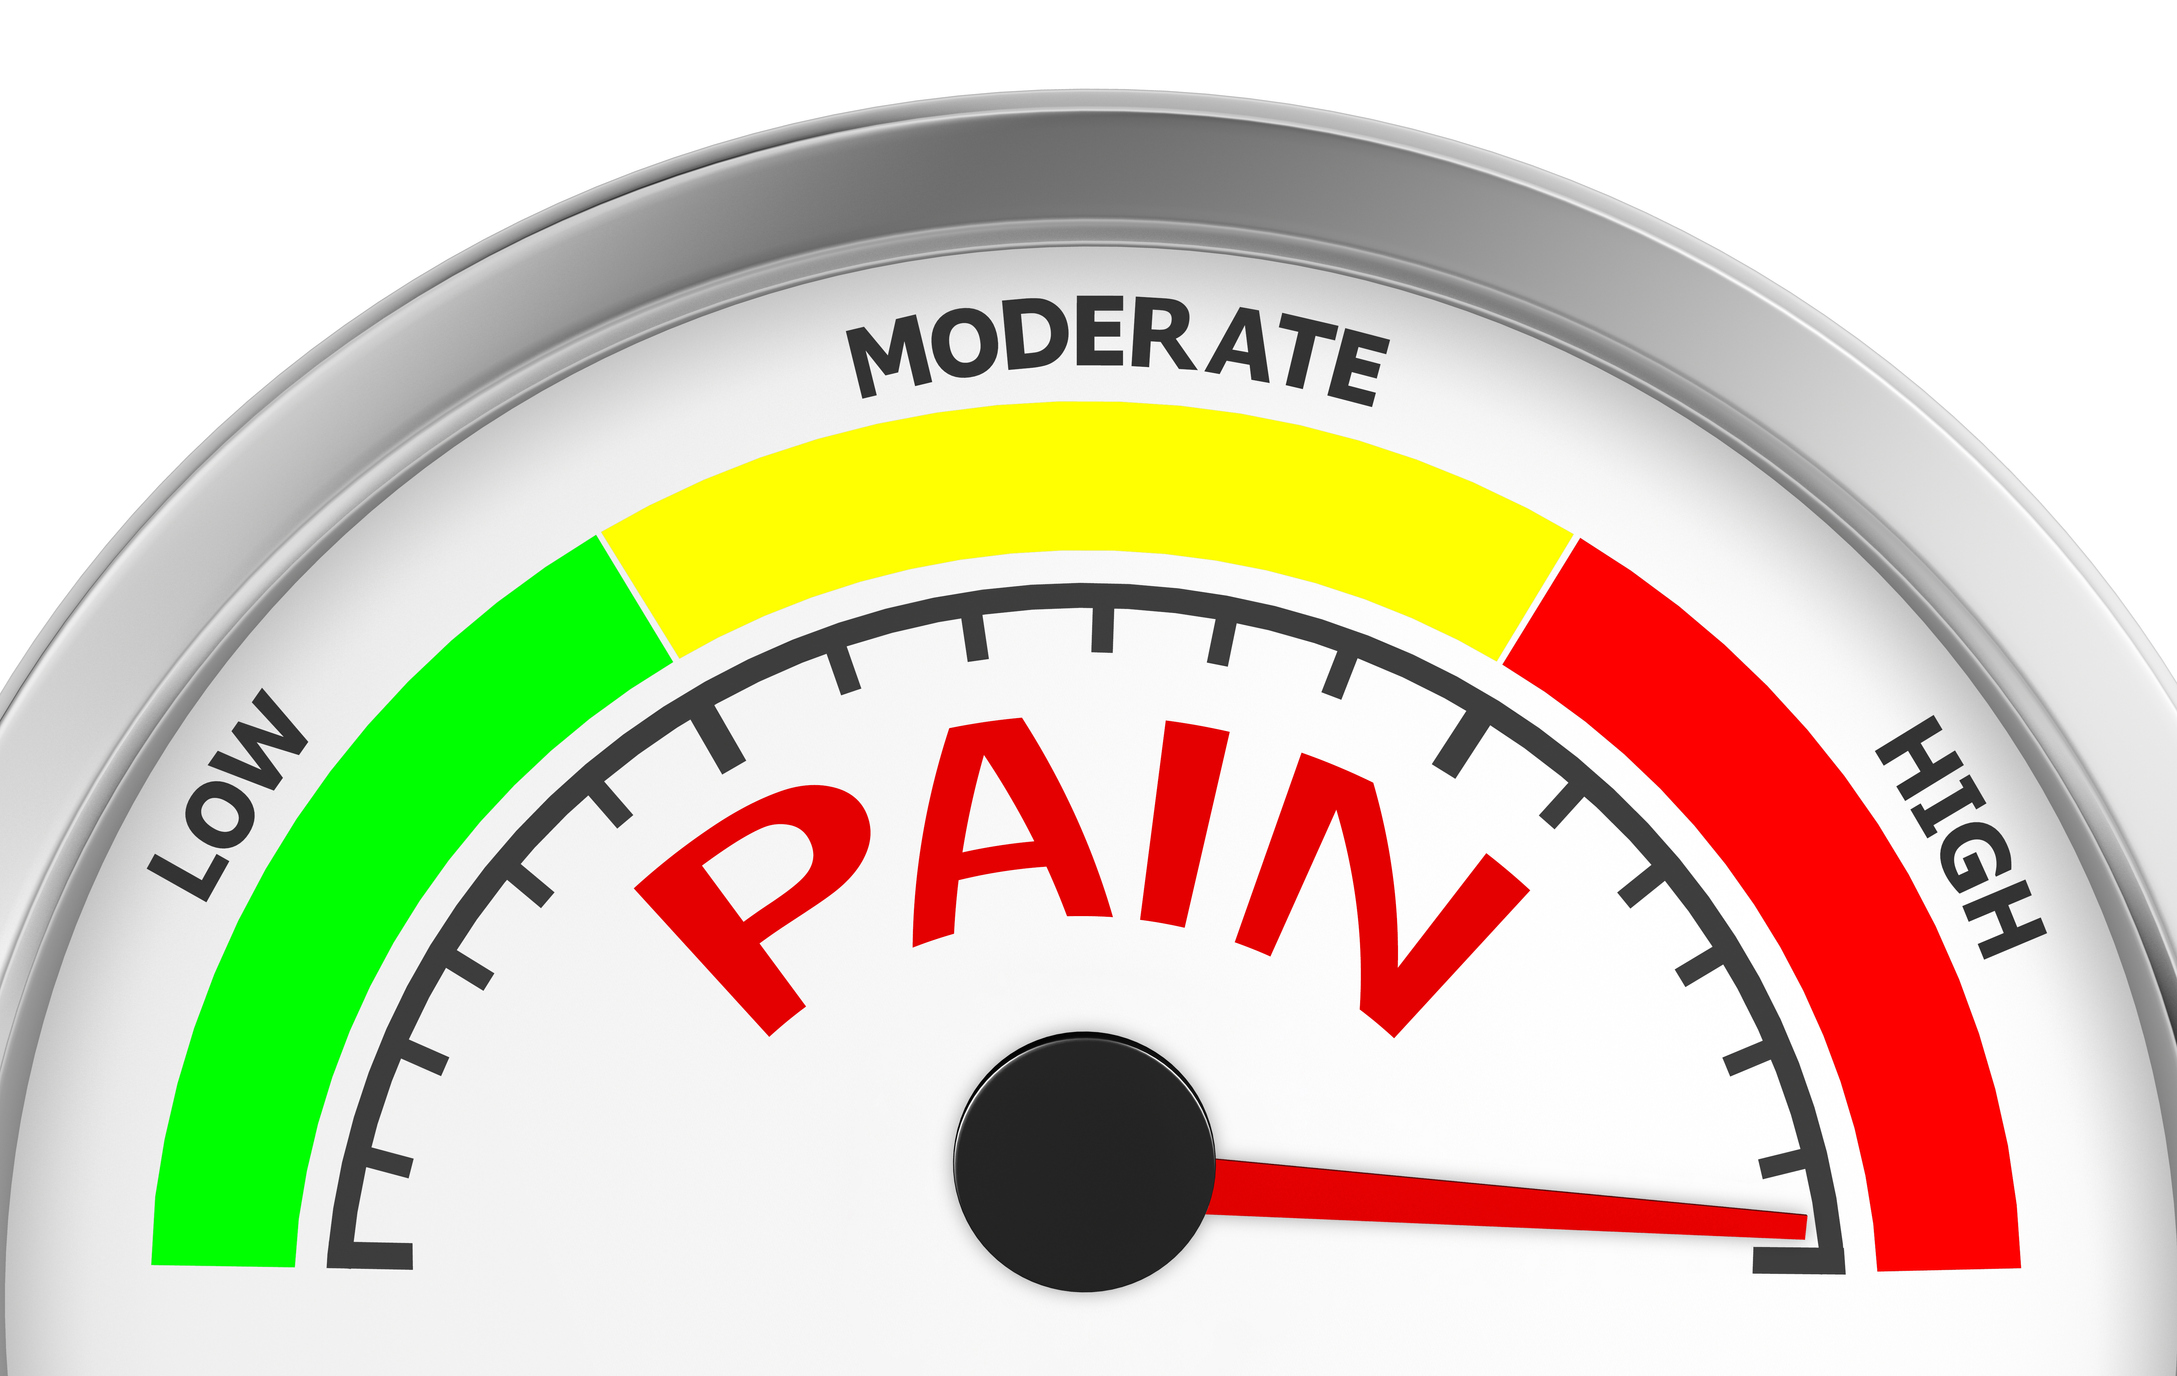 Non-Addictive Pain Control: What Works Best?